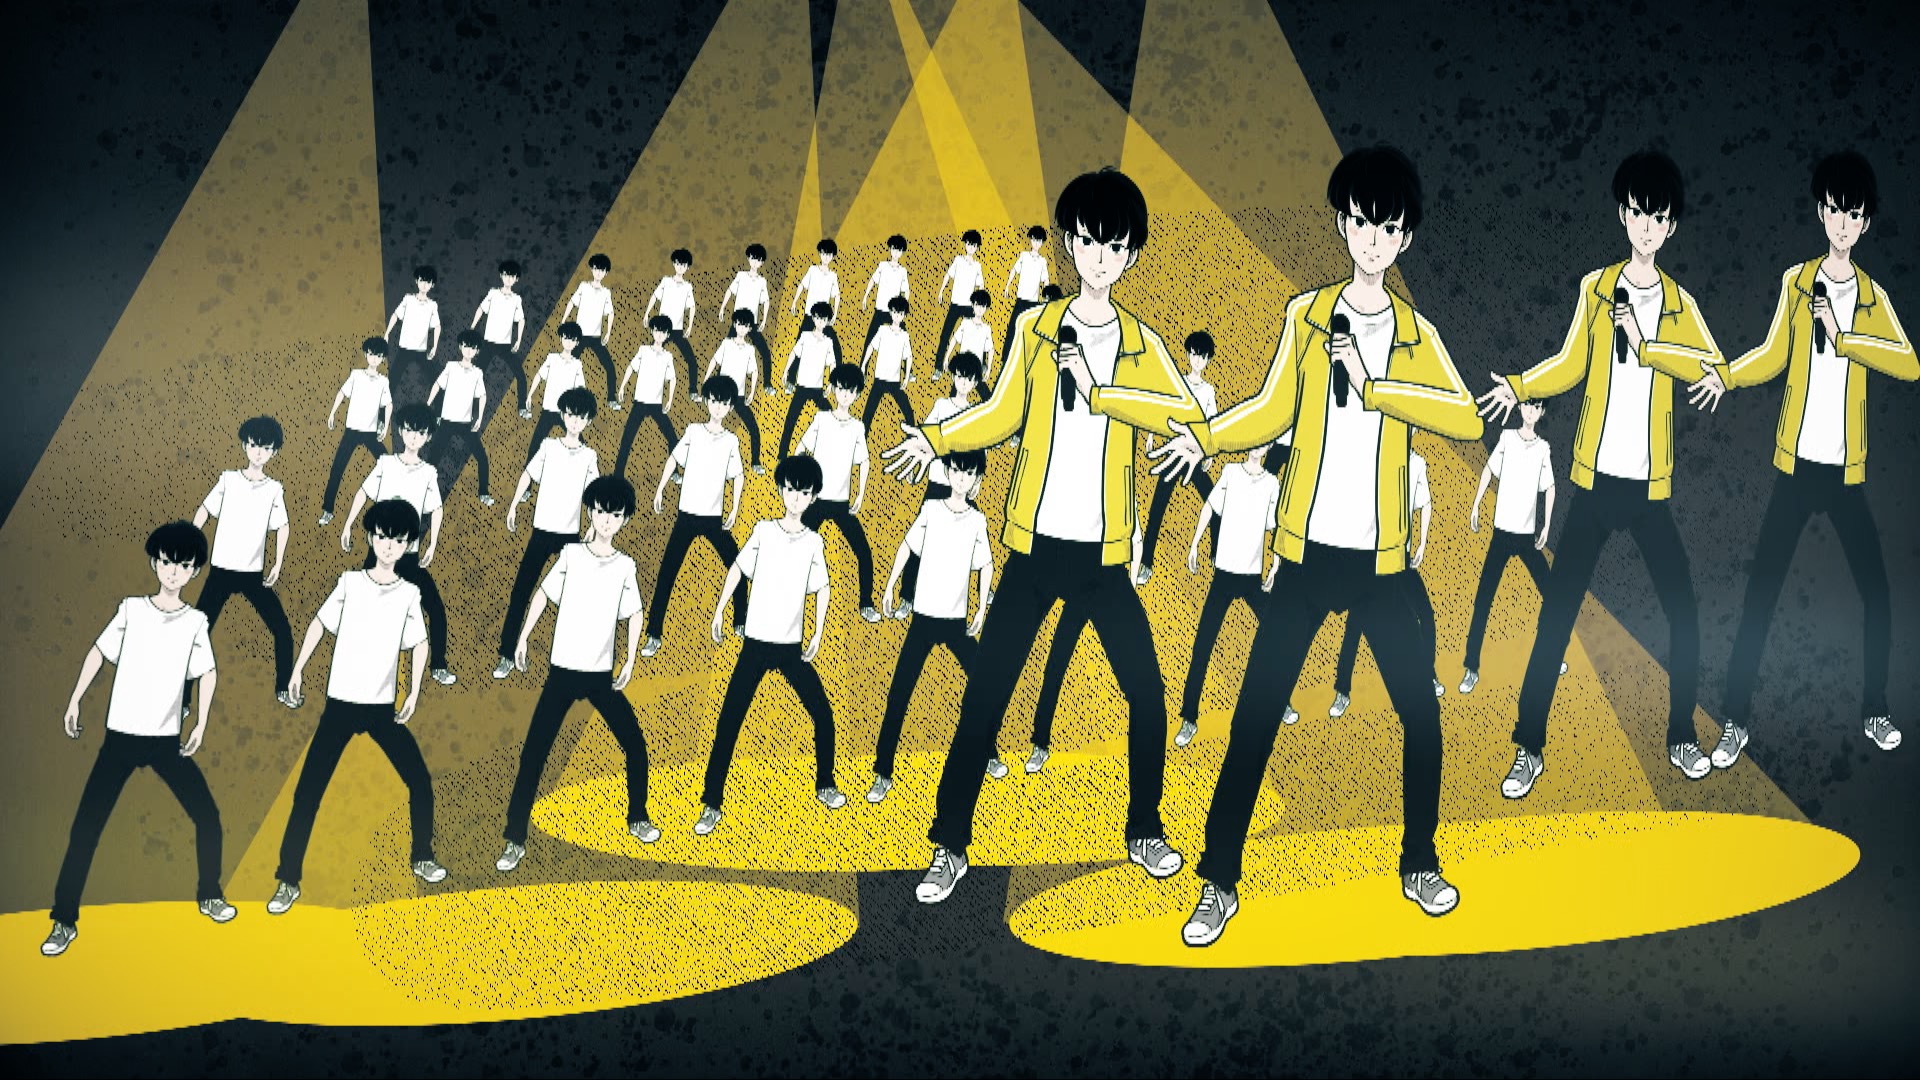 Illustration of row after row of identical j-pop singers and dancers